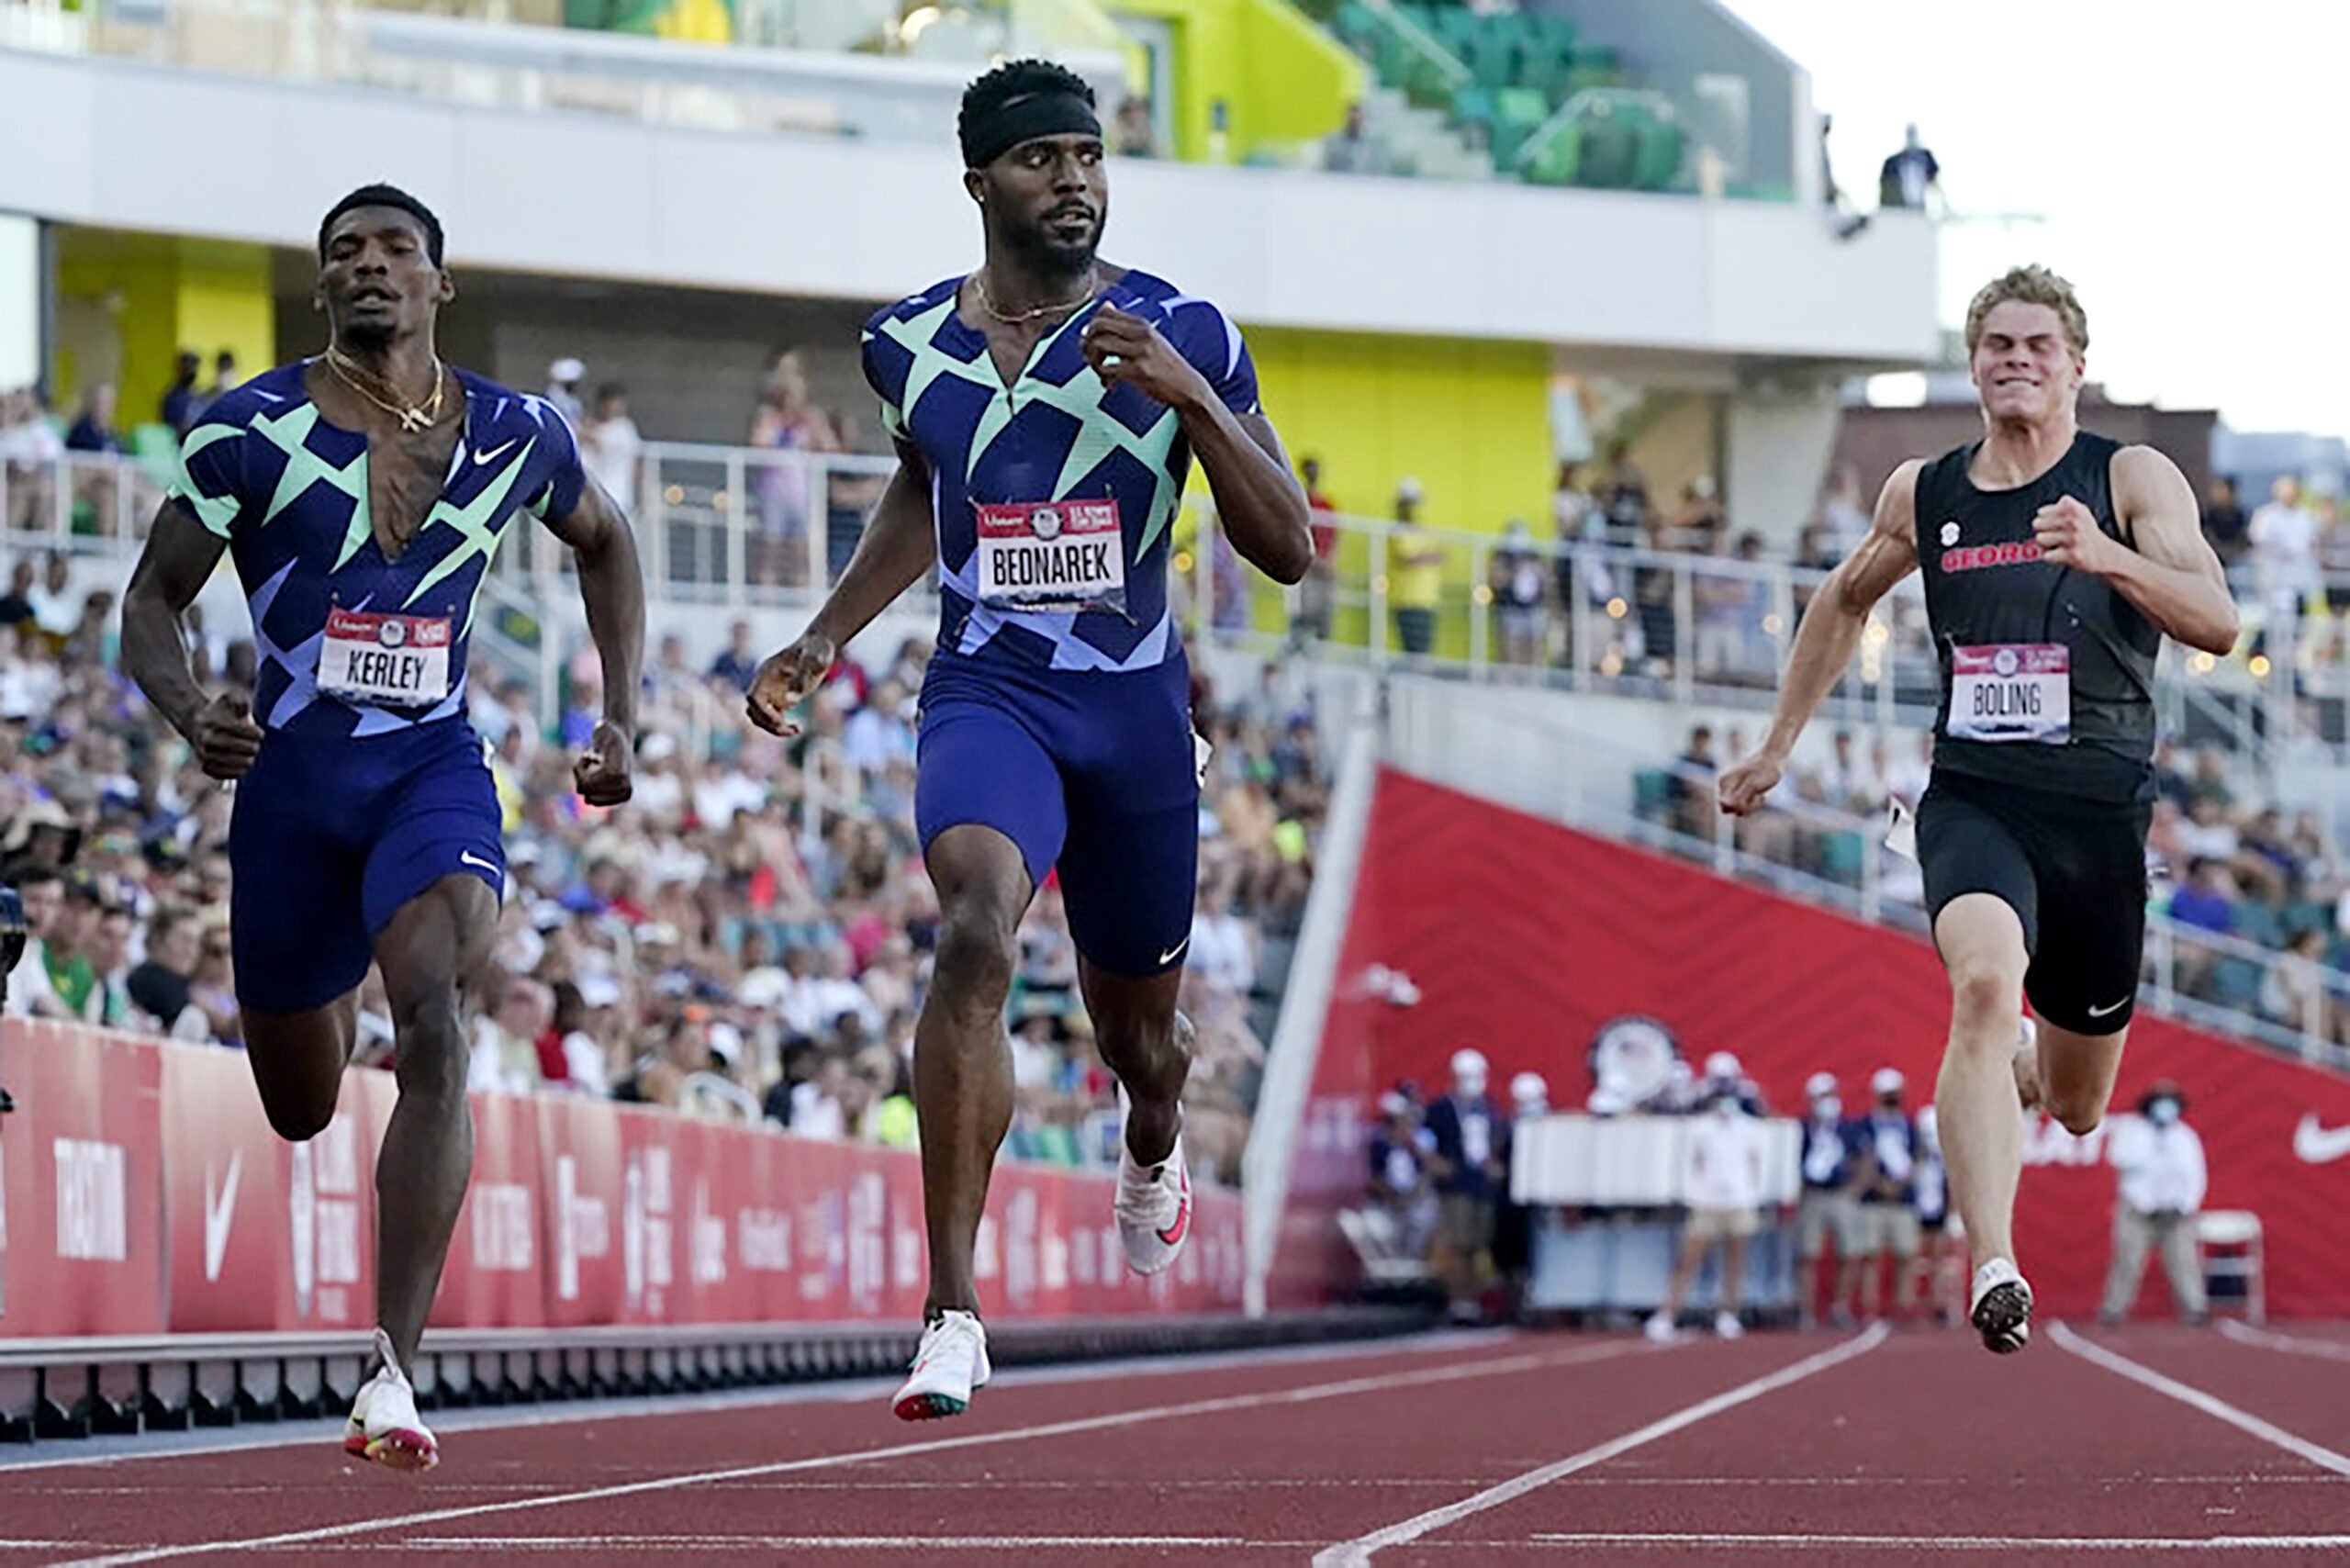 World-class sprinter charts his path from small Wisconsin town to Olympic medalist